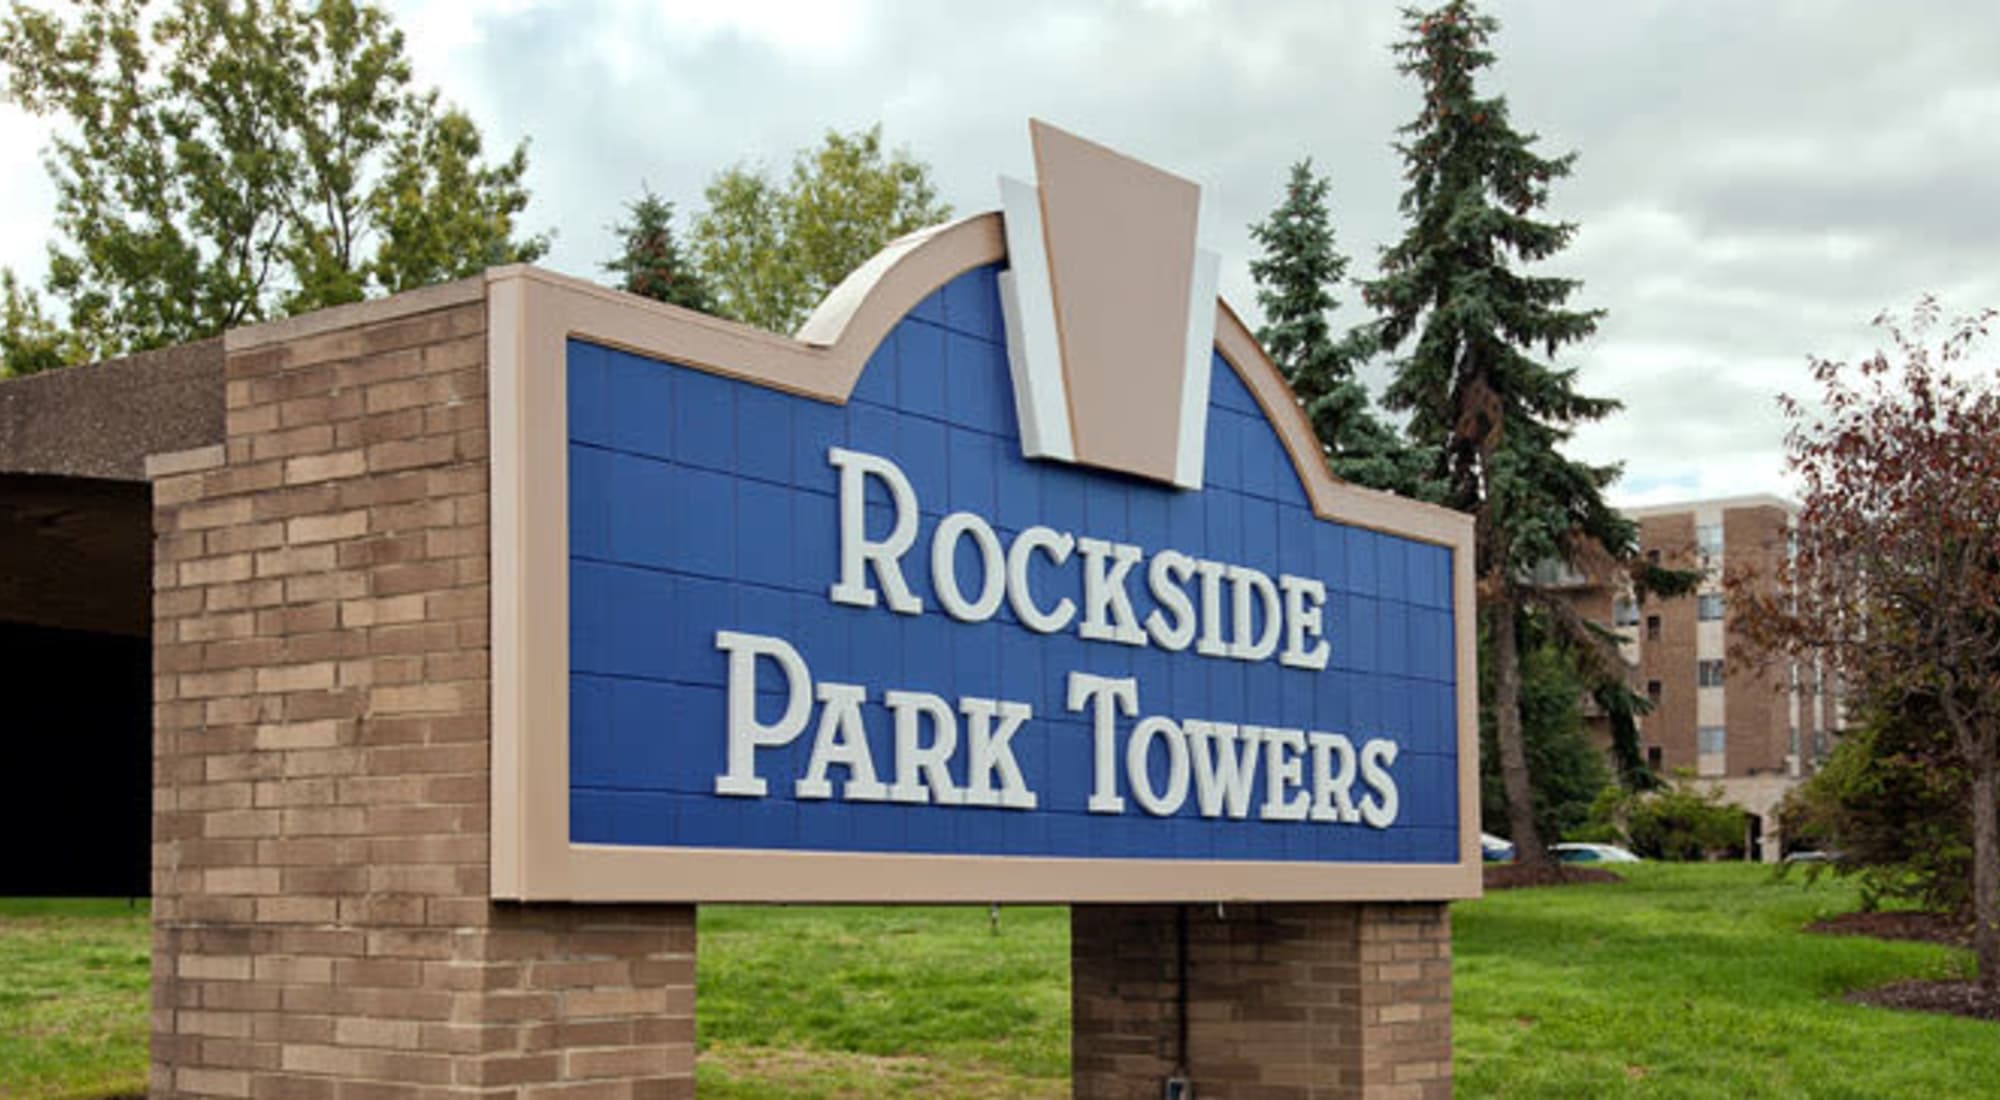  at Rockside Park Towers in Bedford Heights, Ohio